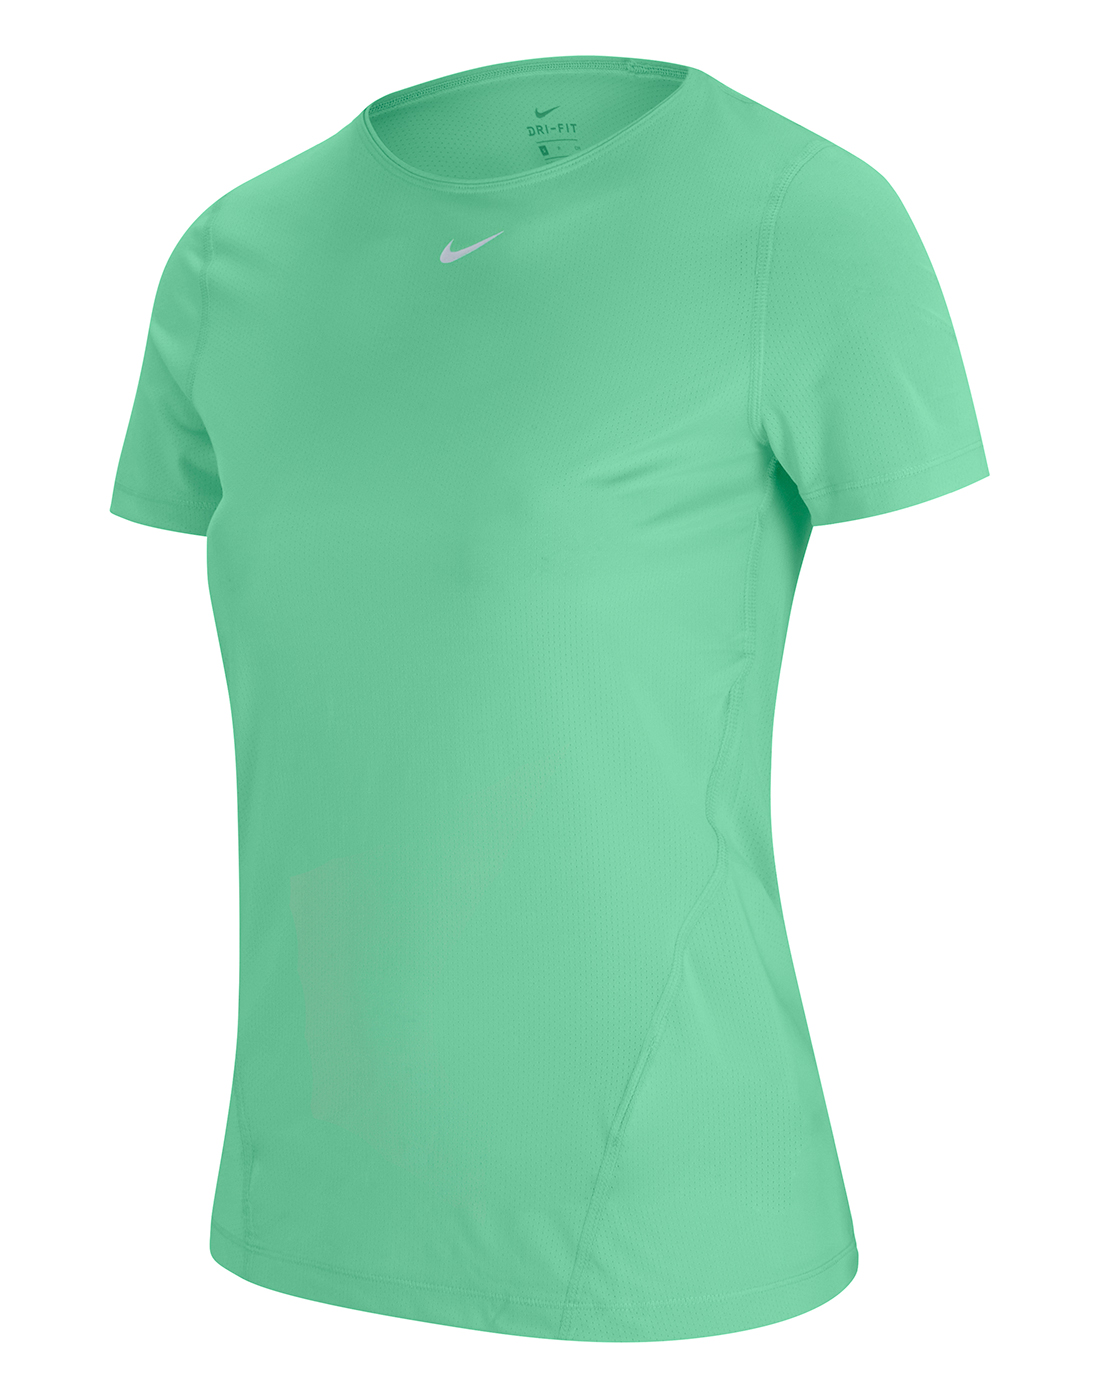 Nike Womens Pro 365 Essential T-shirt - Green | Life Style Sports IE